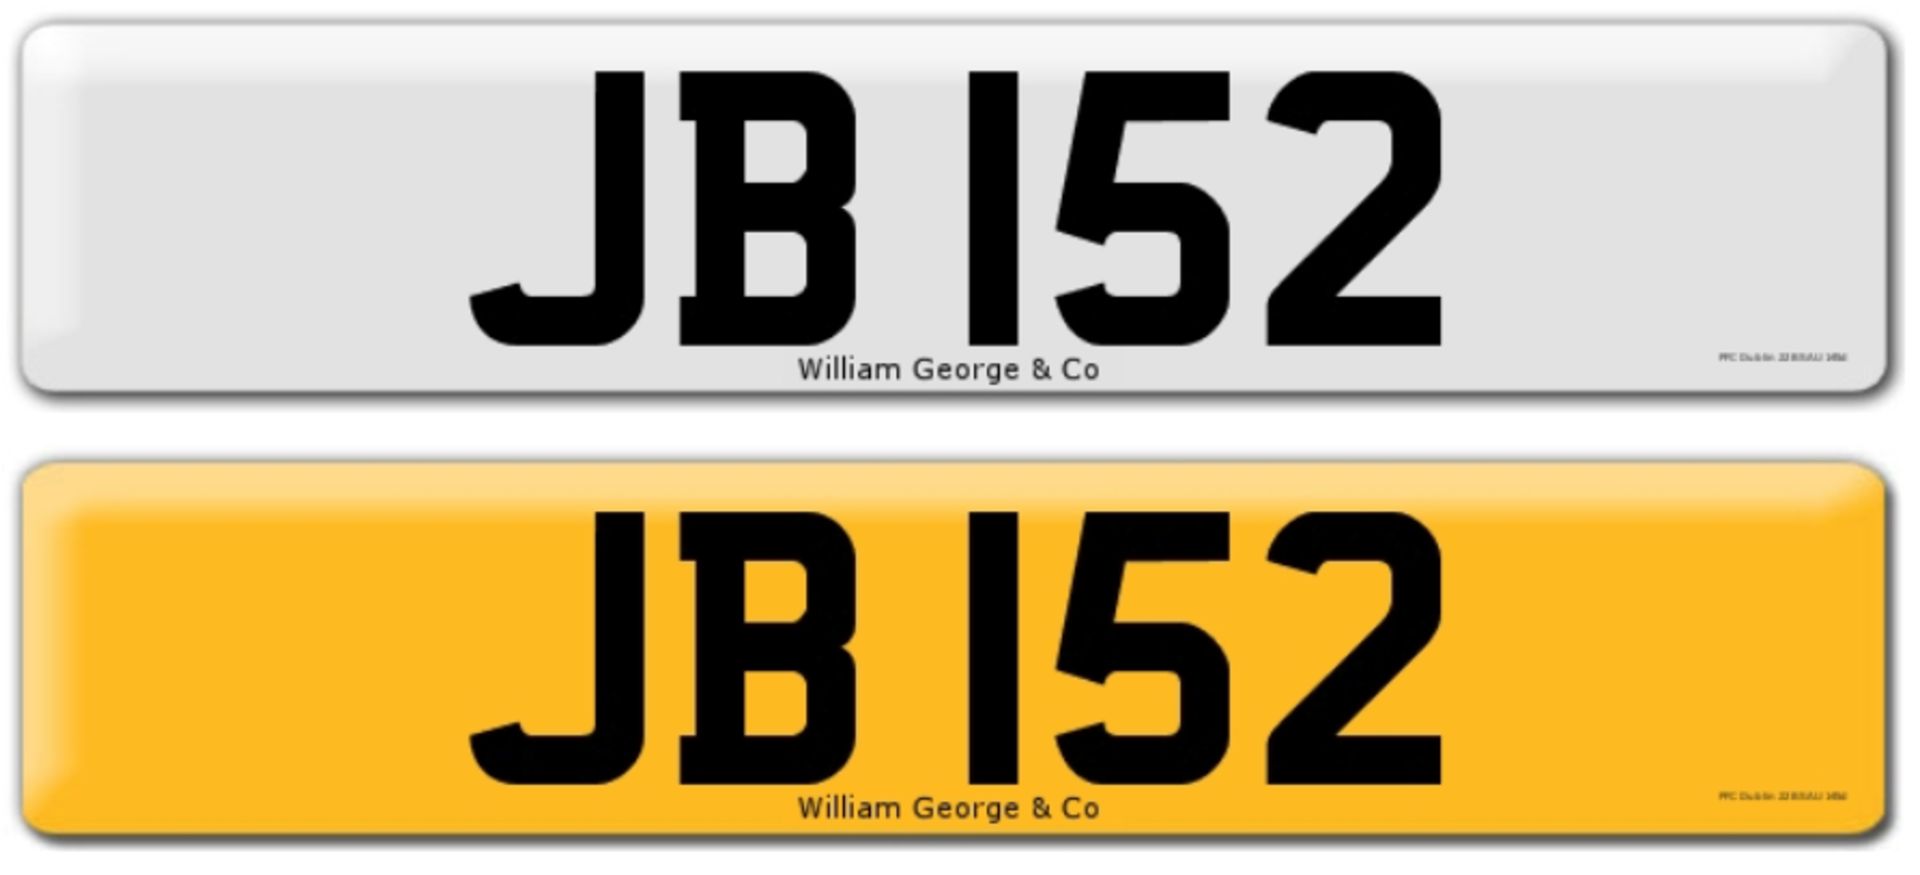 Registration on DVLA retention certificate, ready to transfer JB 152 This number plate /